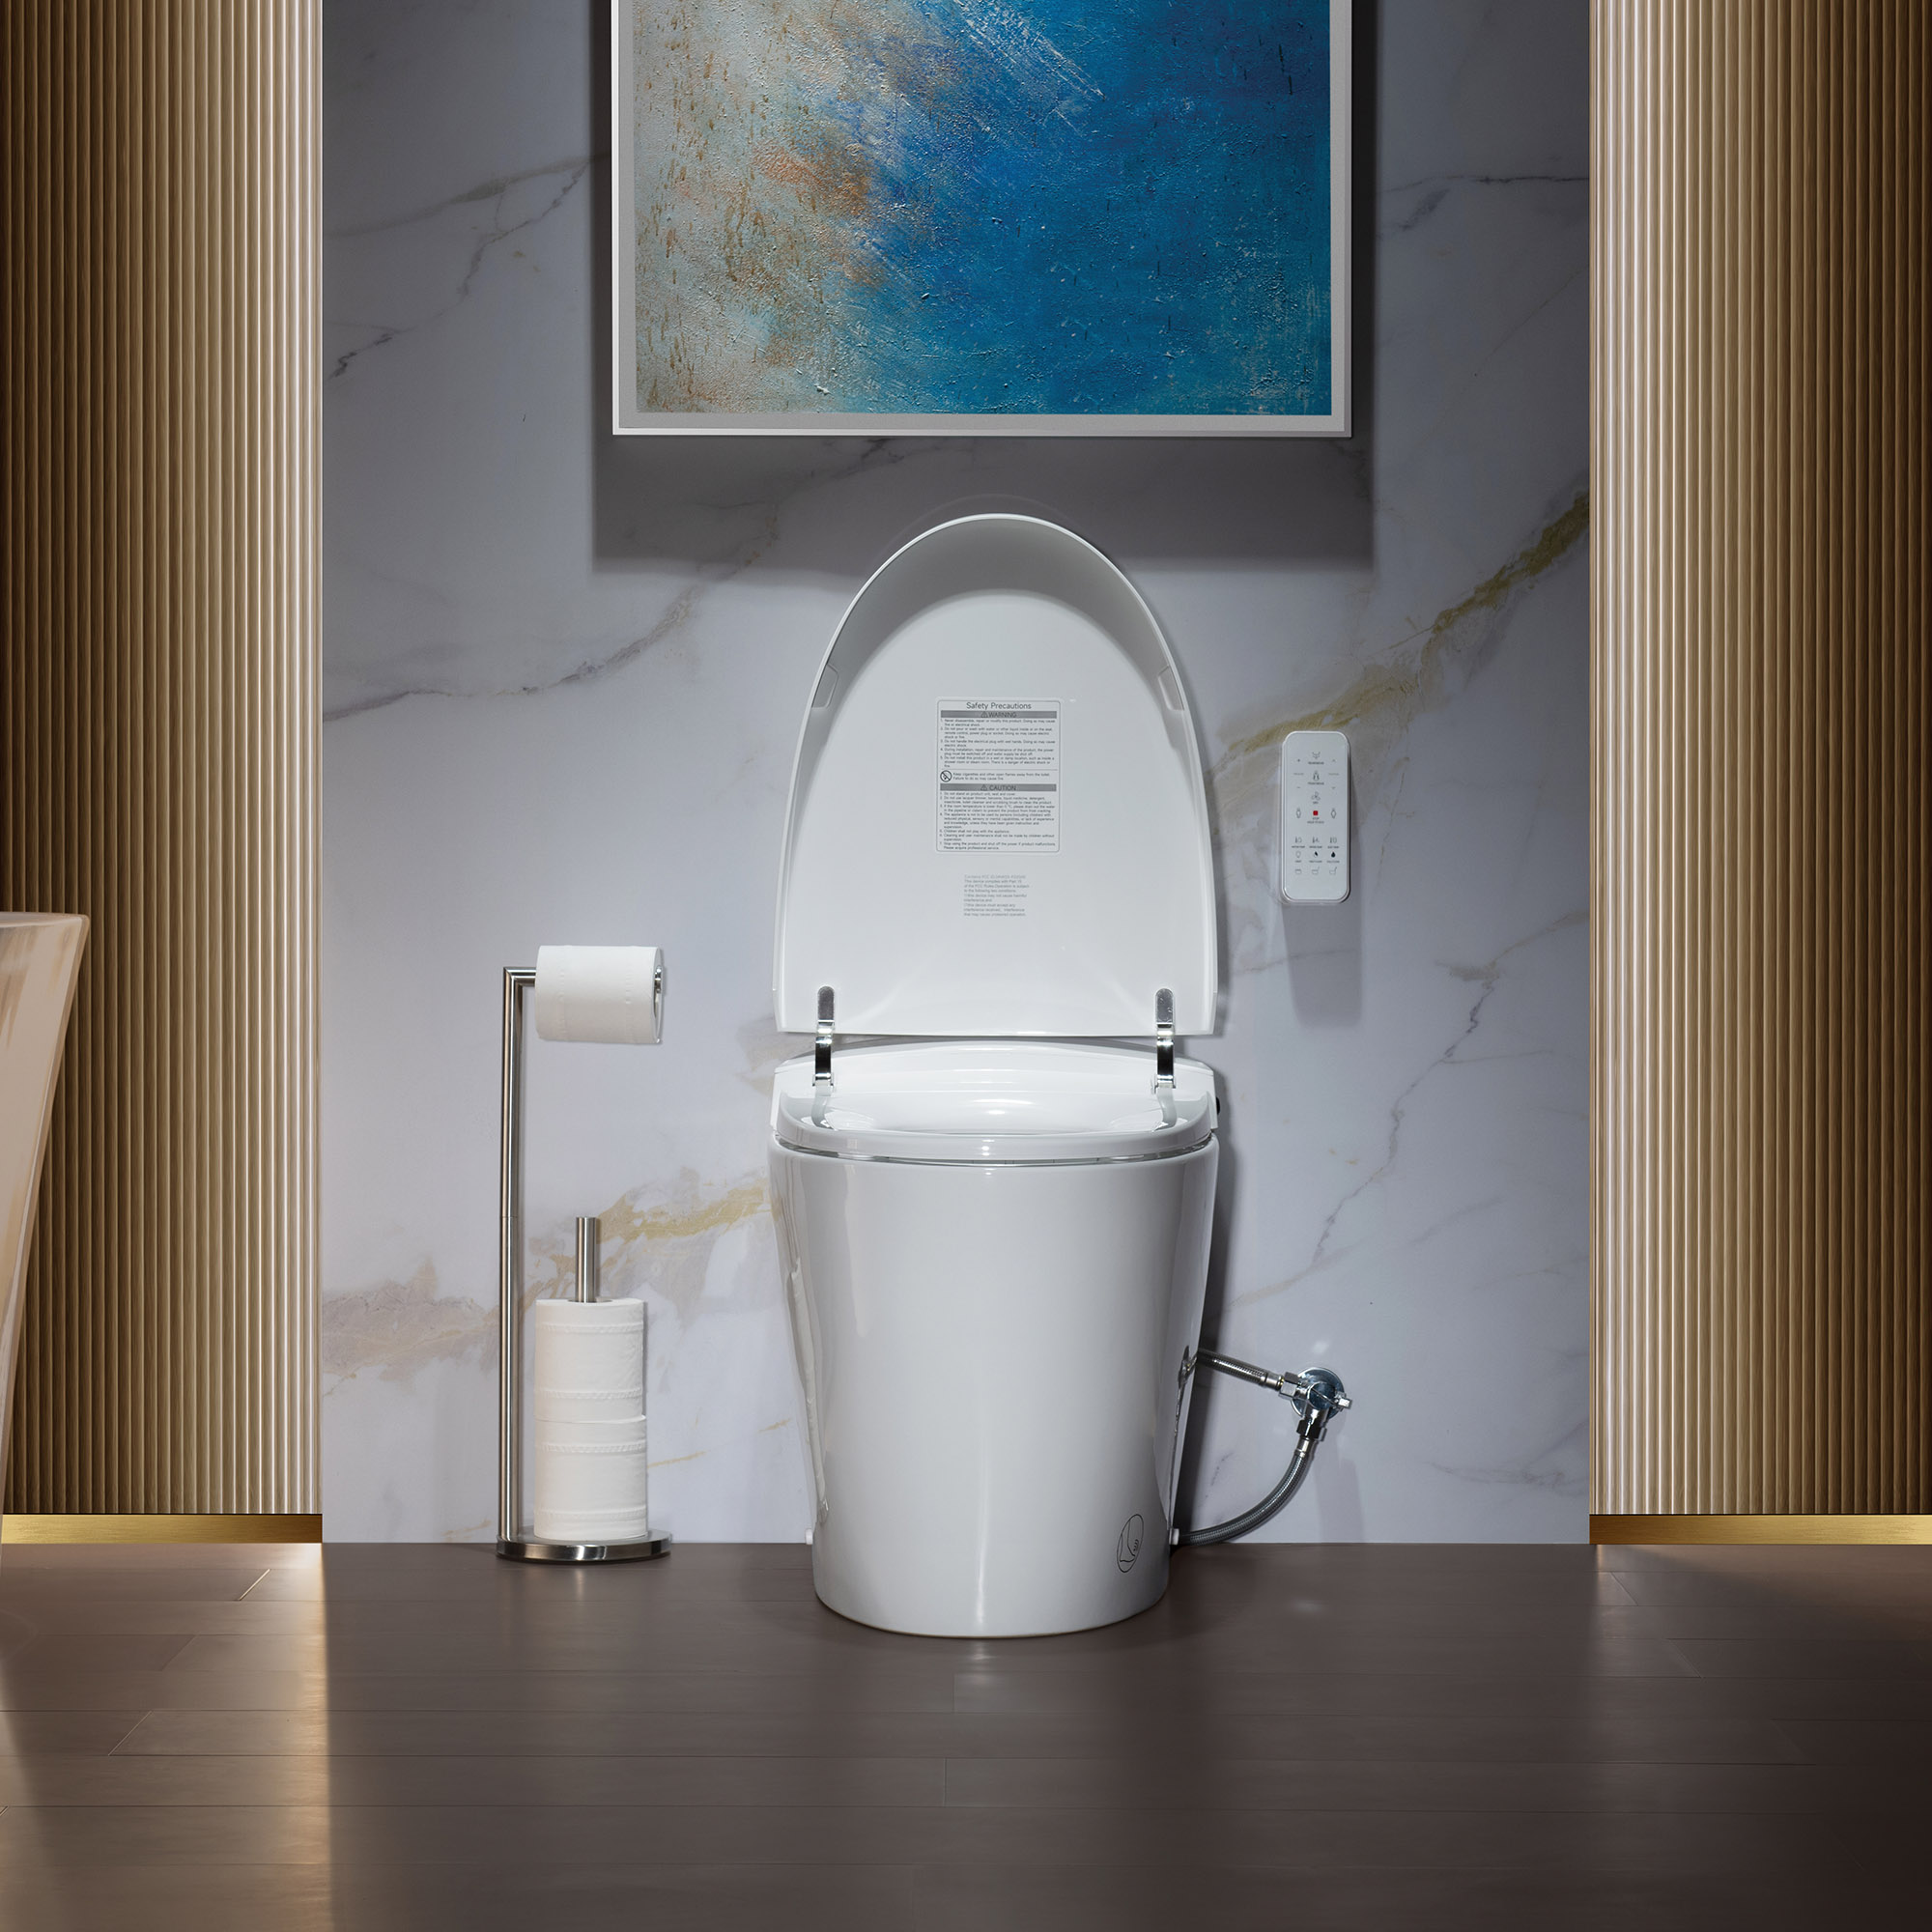  WOODBRIDGE EBT700 One Piece Elongated Smart Toilet Bidet, Auto Open & Close, Auto Flush, Foot Sensor Operation, Heated Seat with Integrated Multi Function Remote Control in White_14839